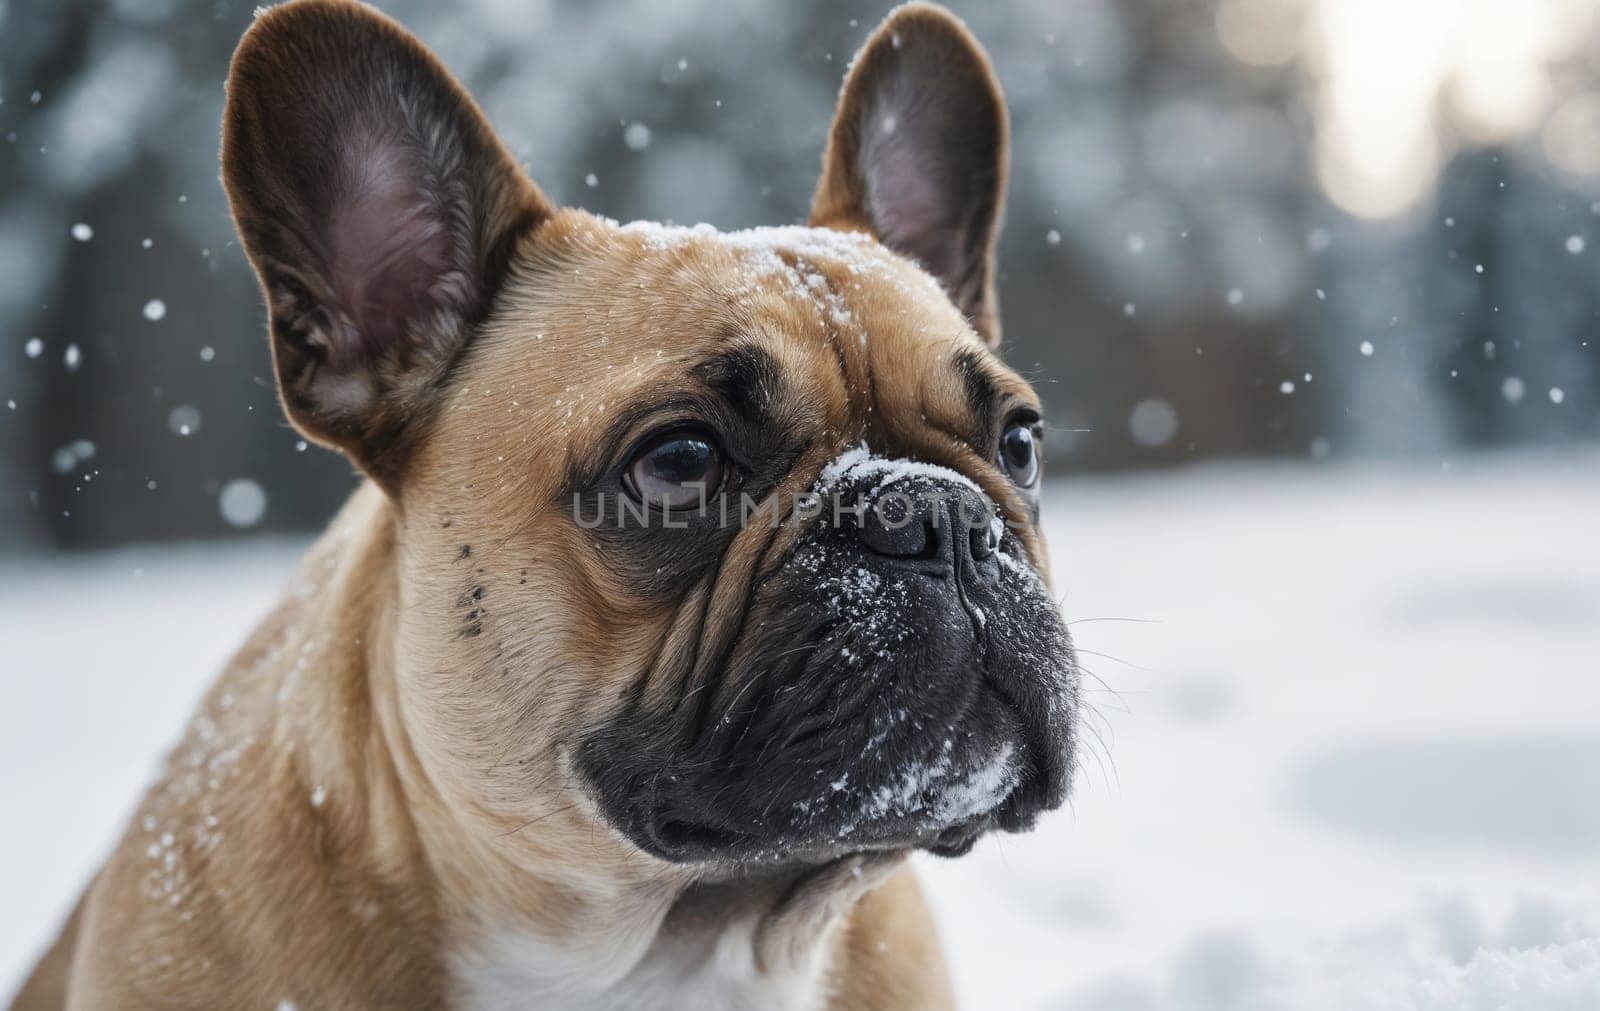 The Fawn French Bulldog, a carnivorous dog breed, is peacefully laying in the snow with its wrinkled face and whiskers, gazing directly at the camera